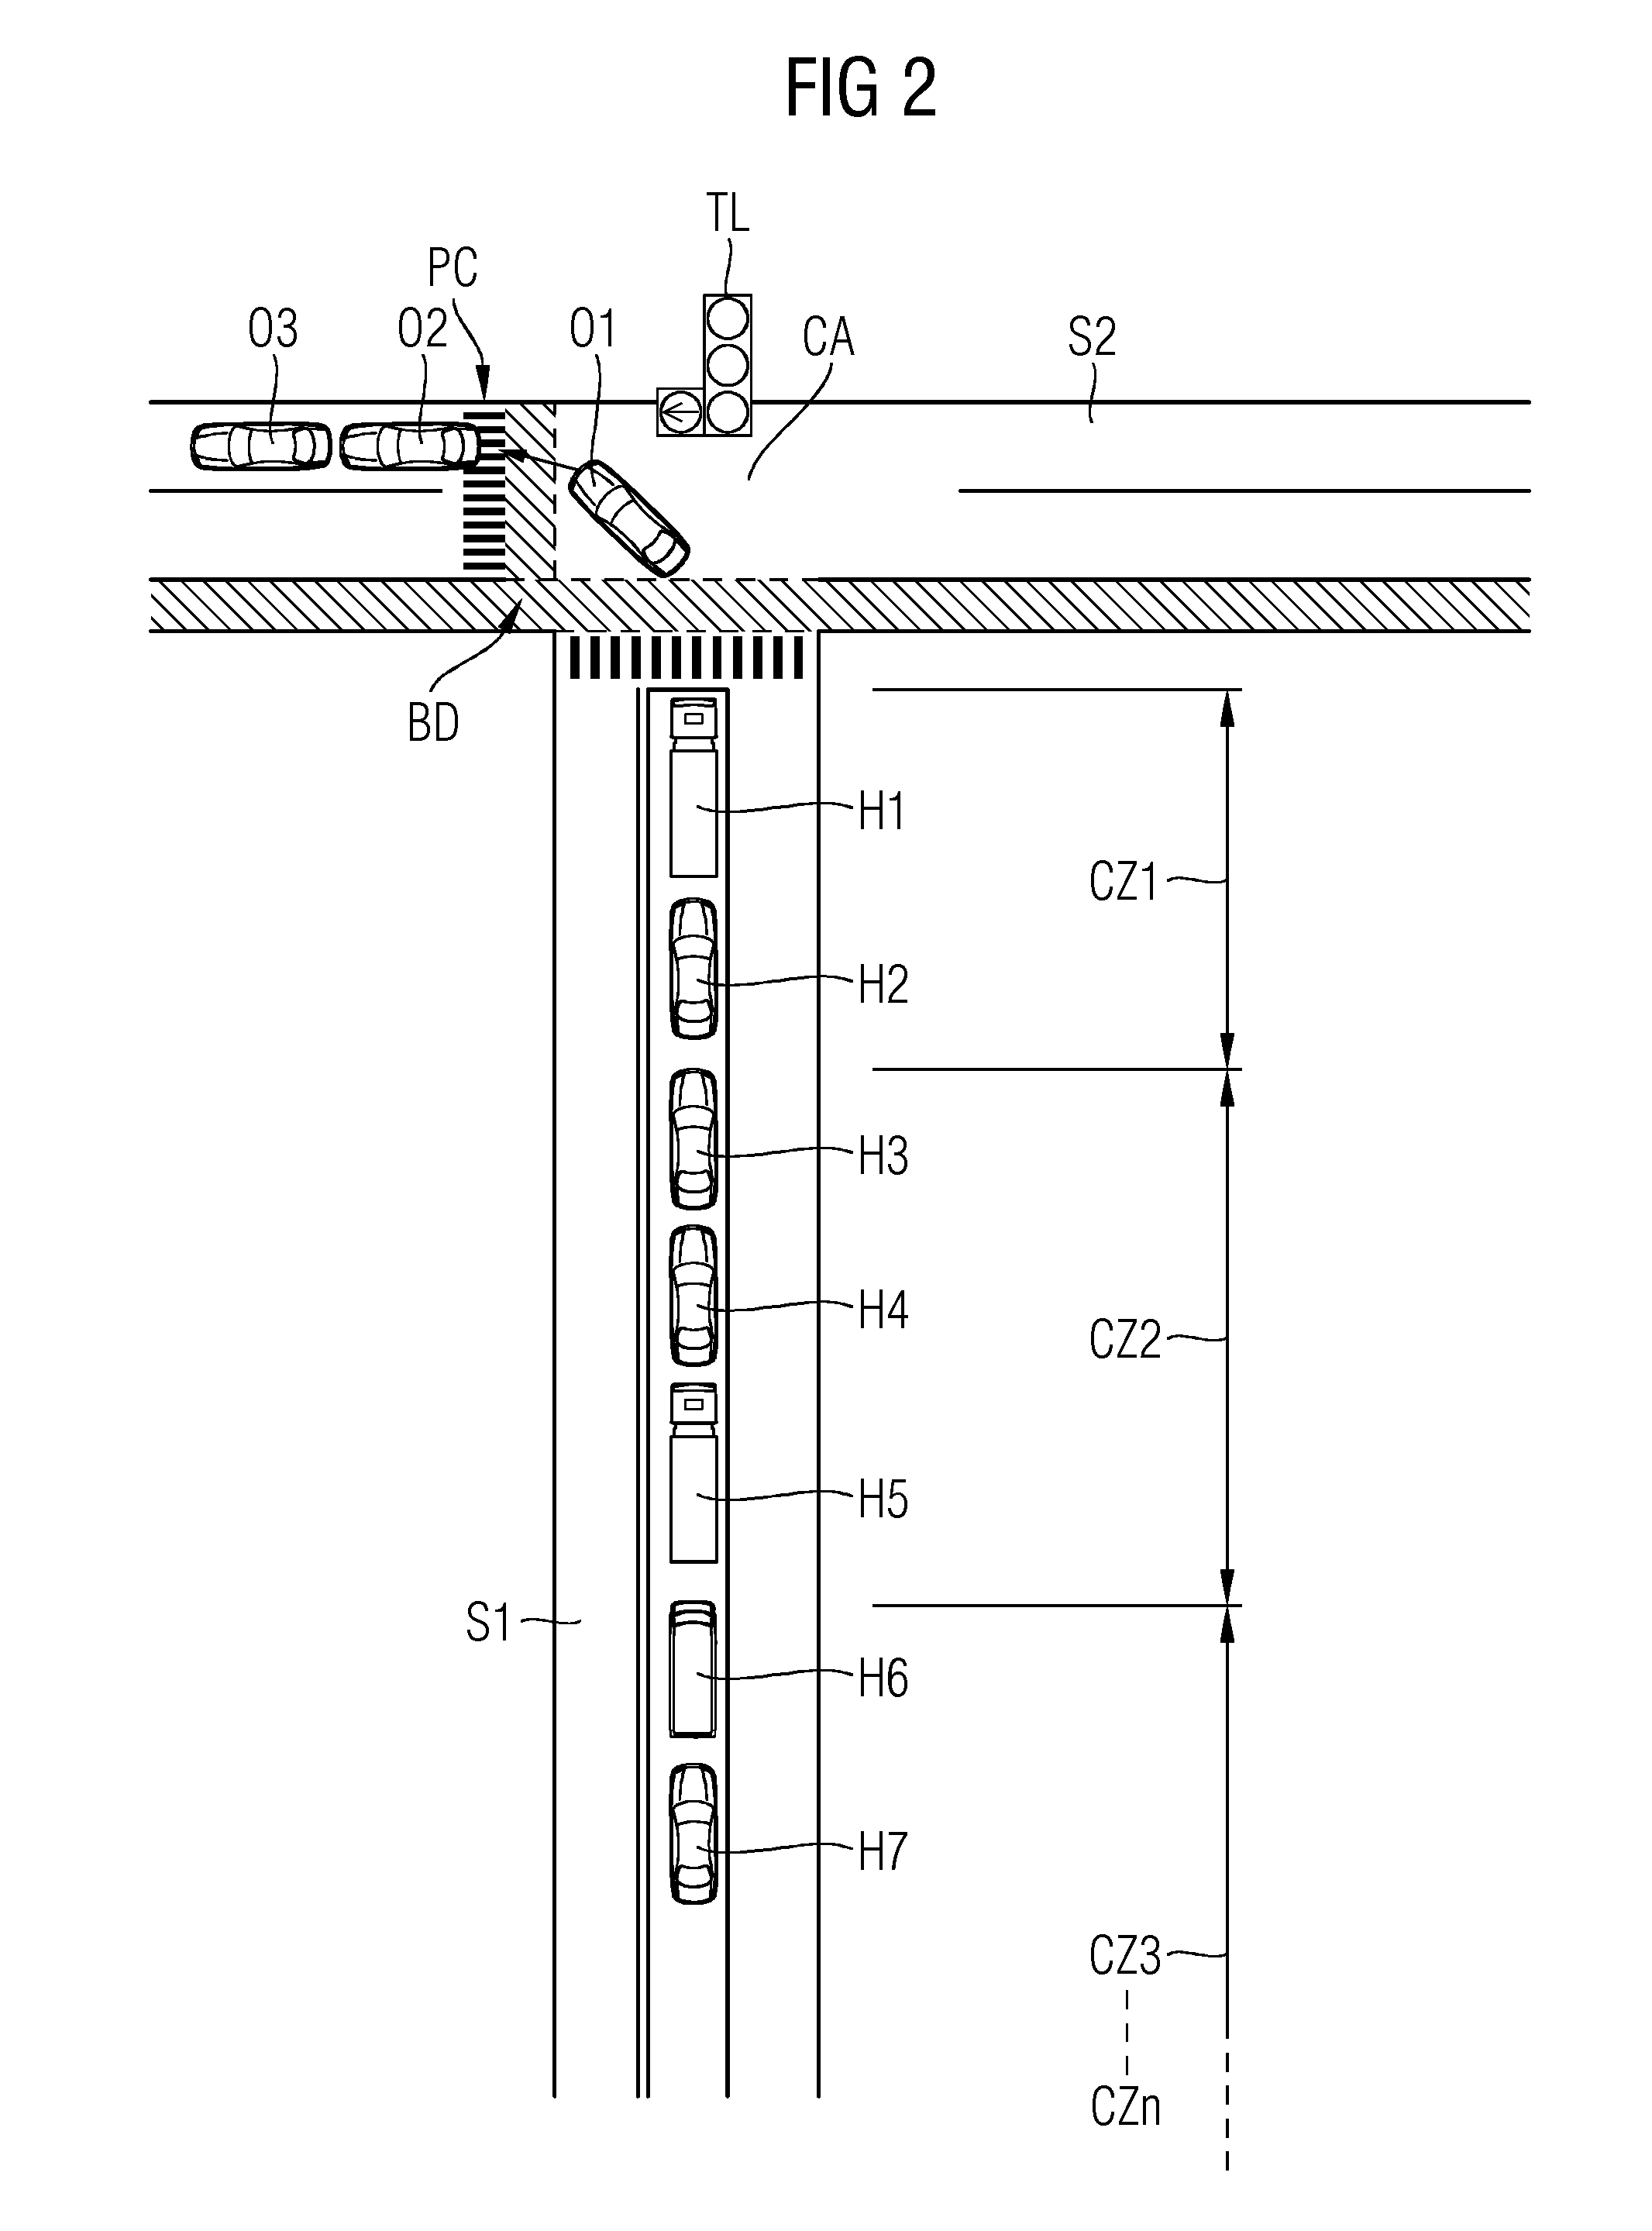 Method for communication within an, in particular wireless, motor vehicle communication system interacting in an ad-hoc manner, device for the traffic infrastructure and road user device